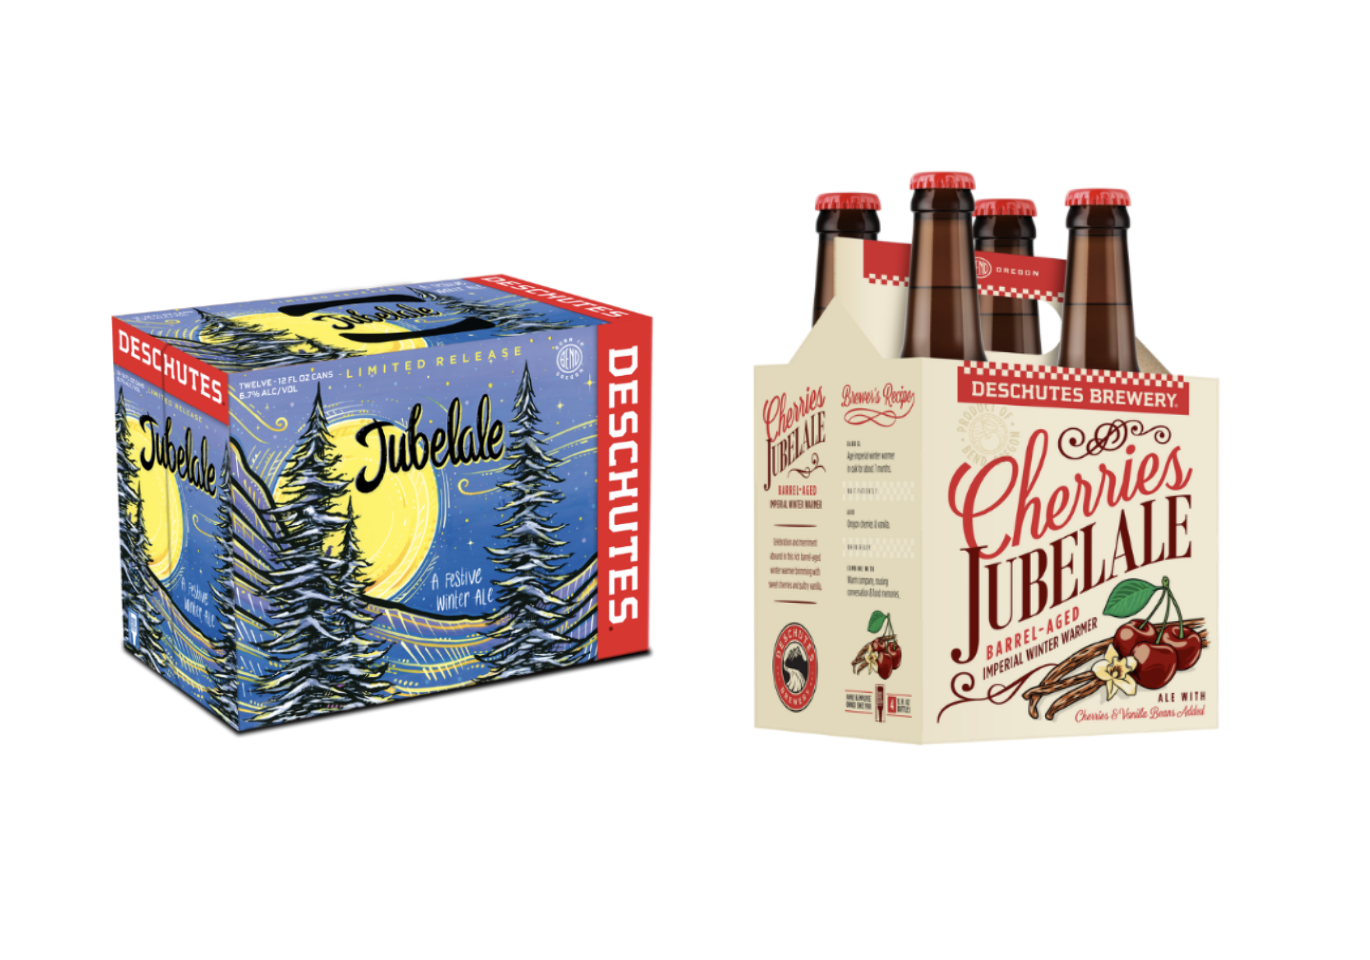 Deschutes Brewery Releases 2021 Jubelale and the new Cherries Jubelale